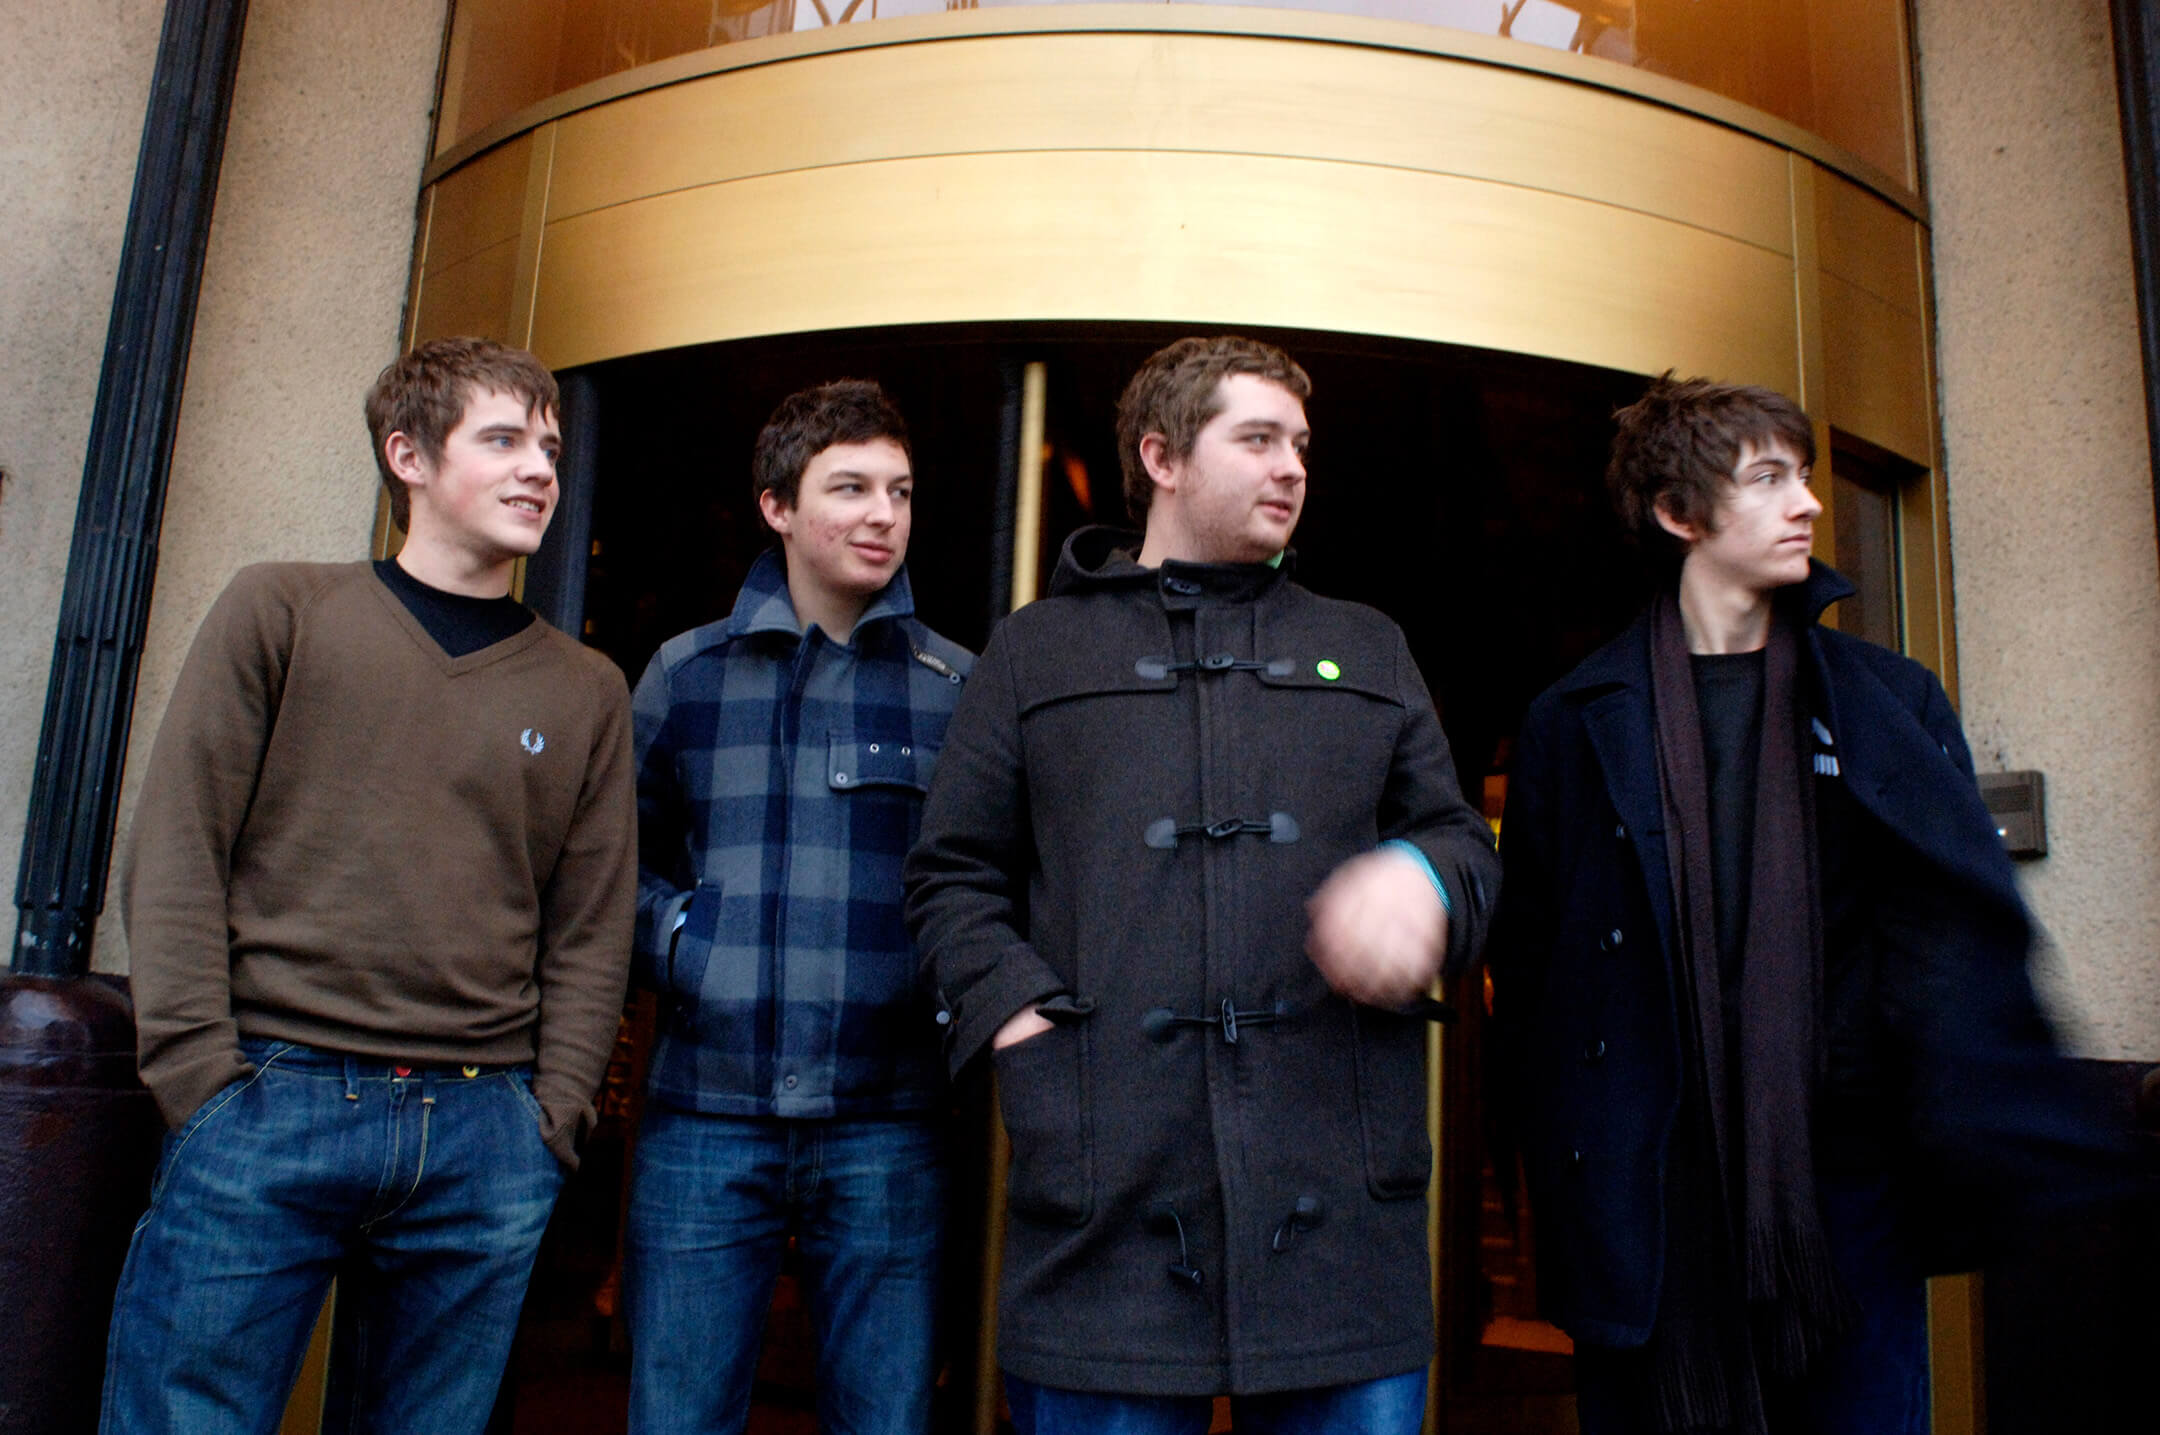 Arctic Monkeys posed in Amsterdam, Netherlands on 6th December 2005